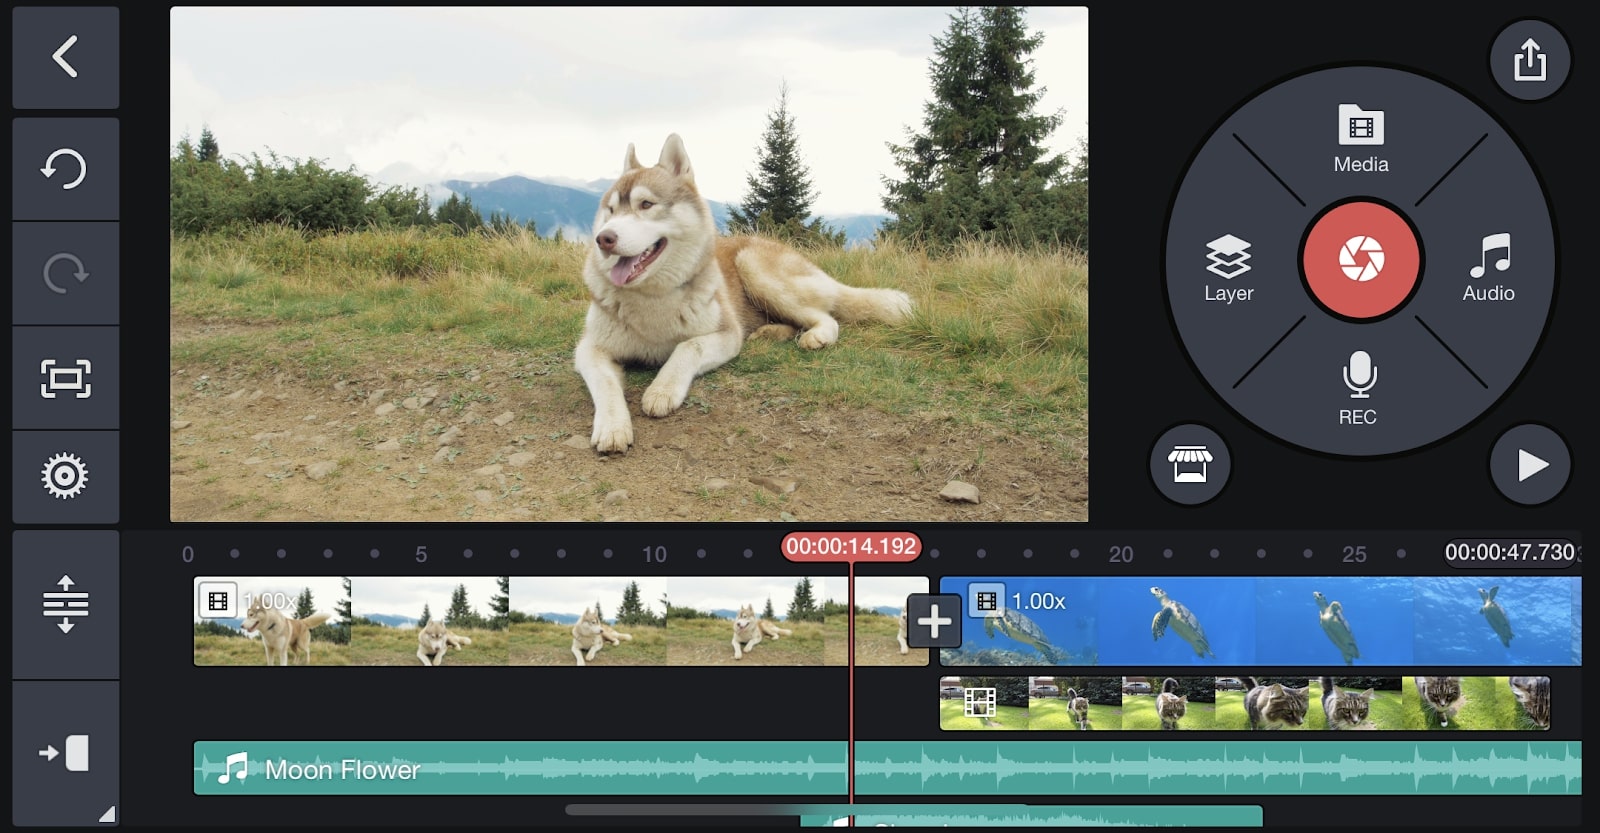 Interface of Kinemaster, one of the best free video editing software options